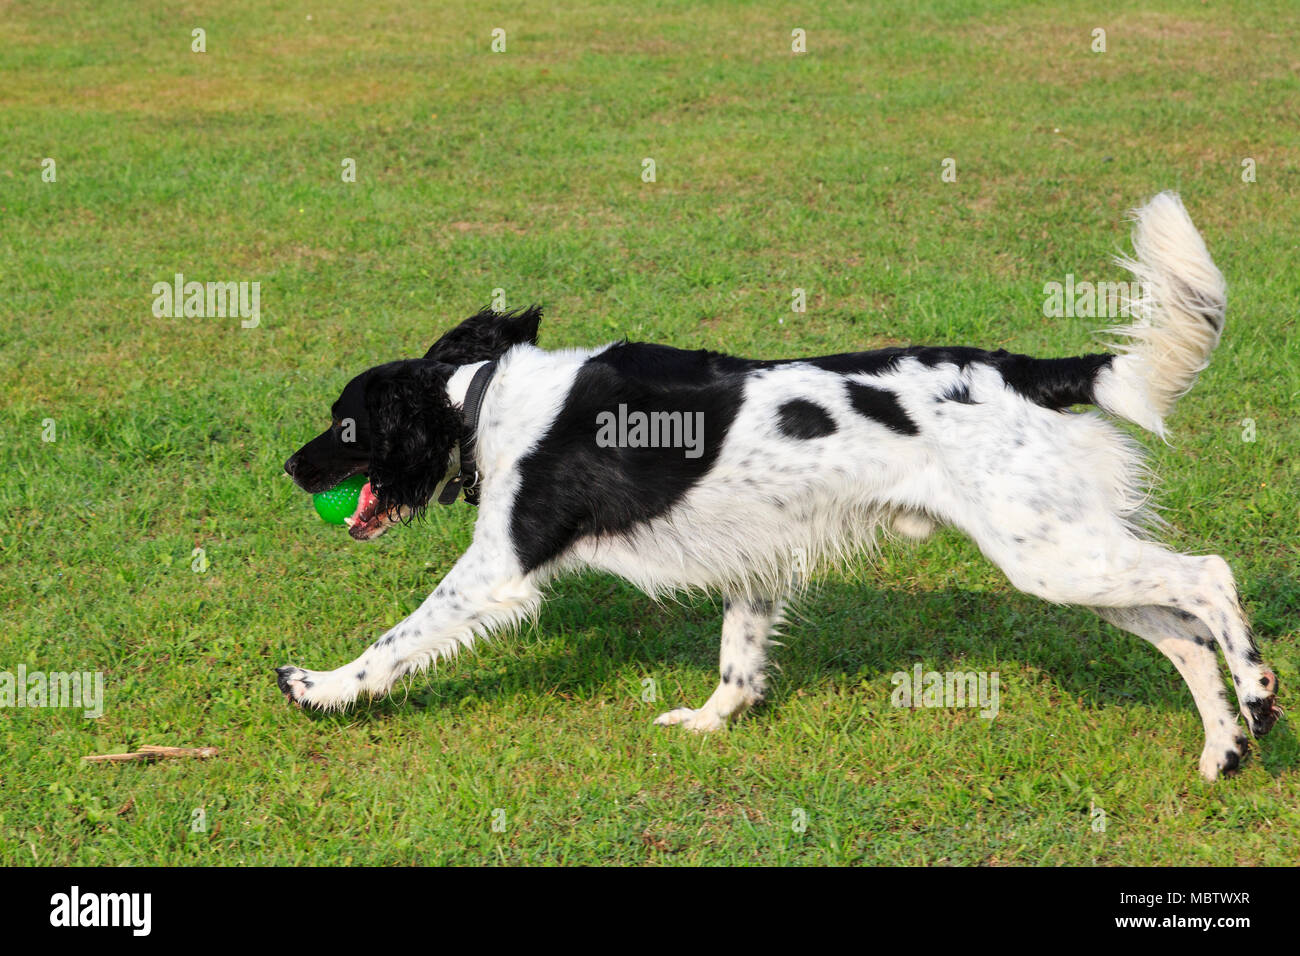 Black and White English Springer Spaniel (Canis lupus familiaris) dog running outside carrying a ball in its mouth. England, UK, Britain Stock Photo